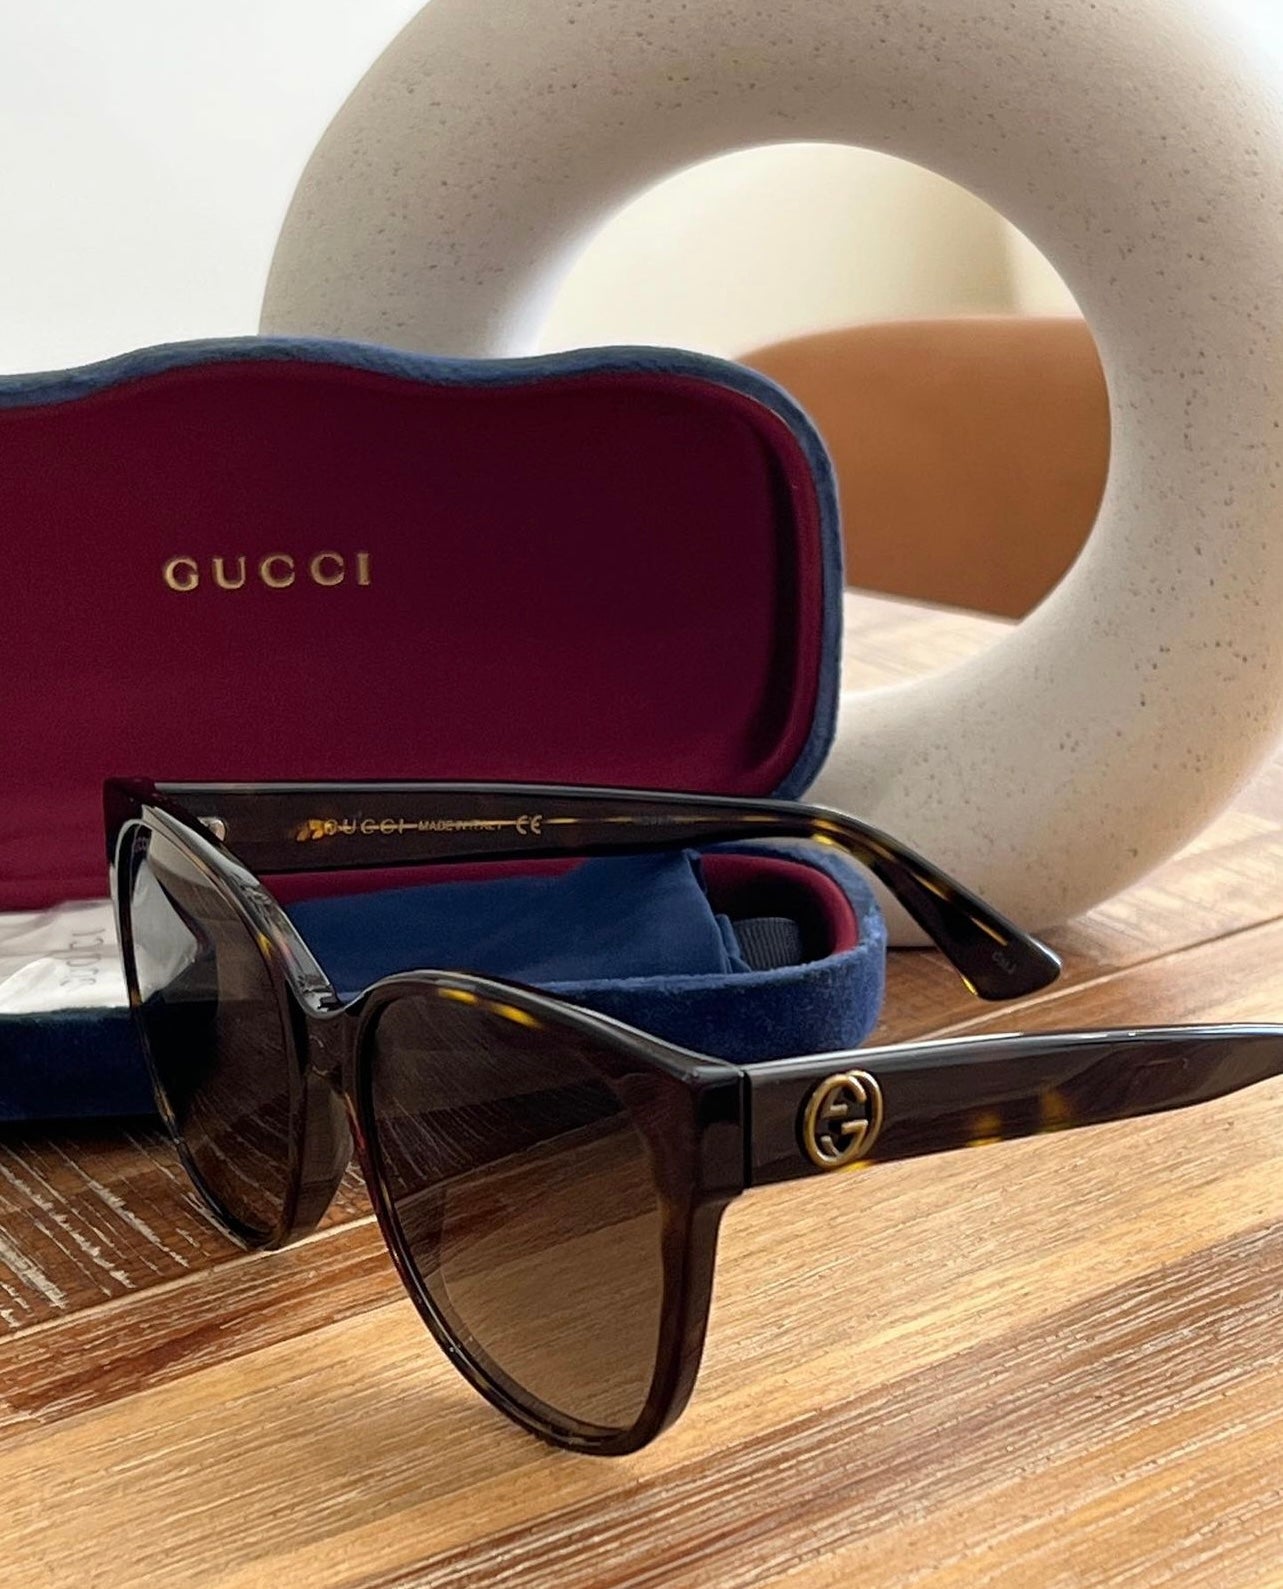 GUCCI Ladies Sunglasses piecesfactory